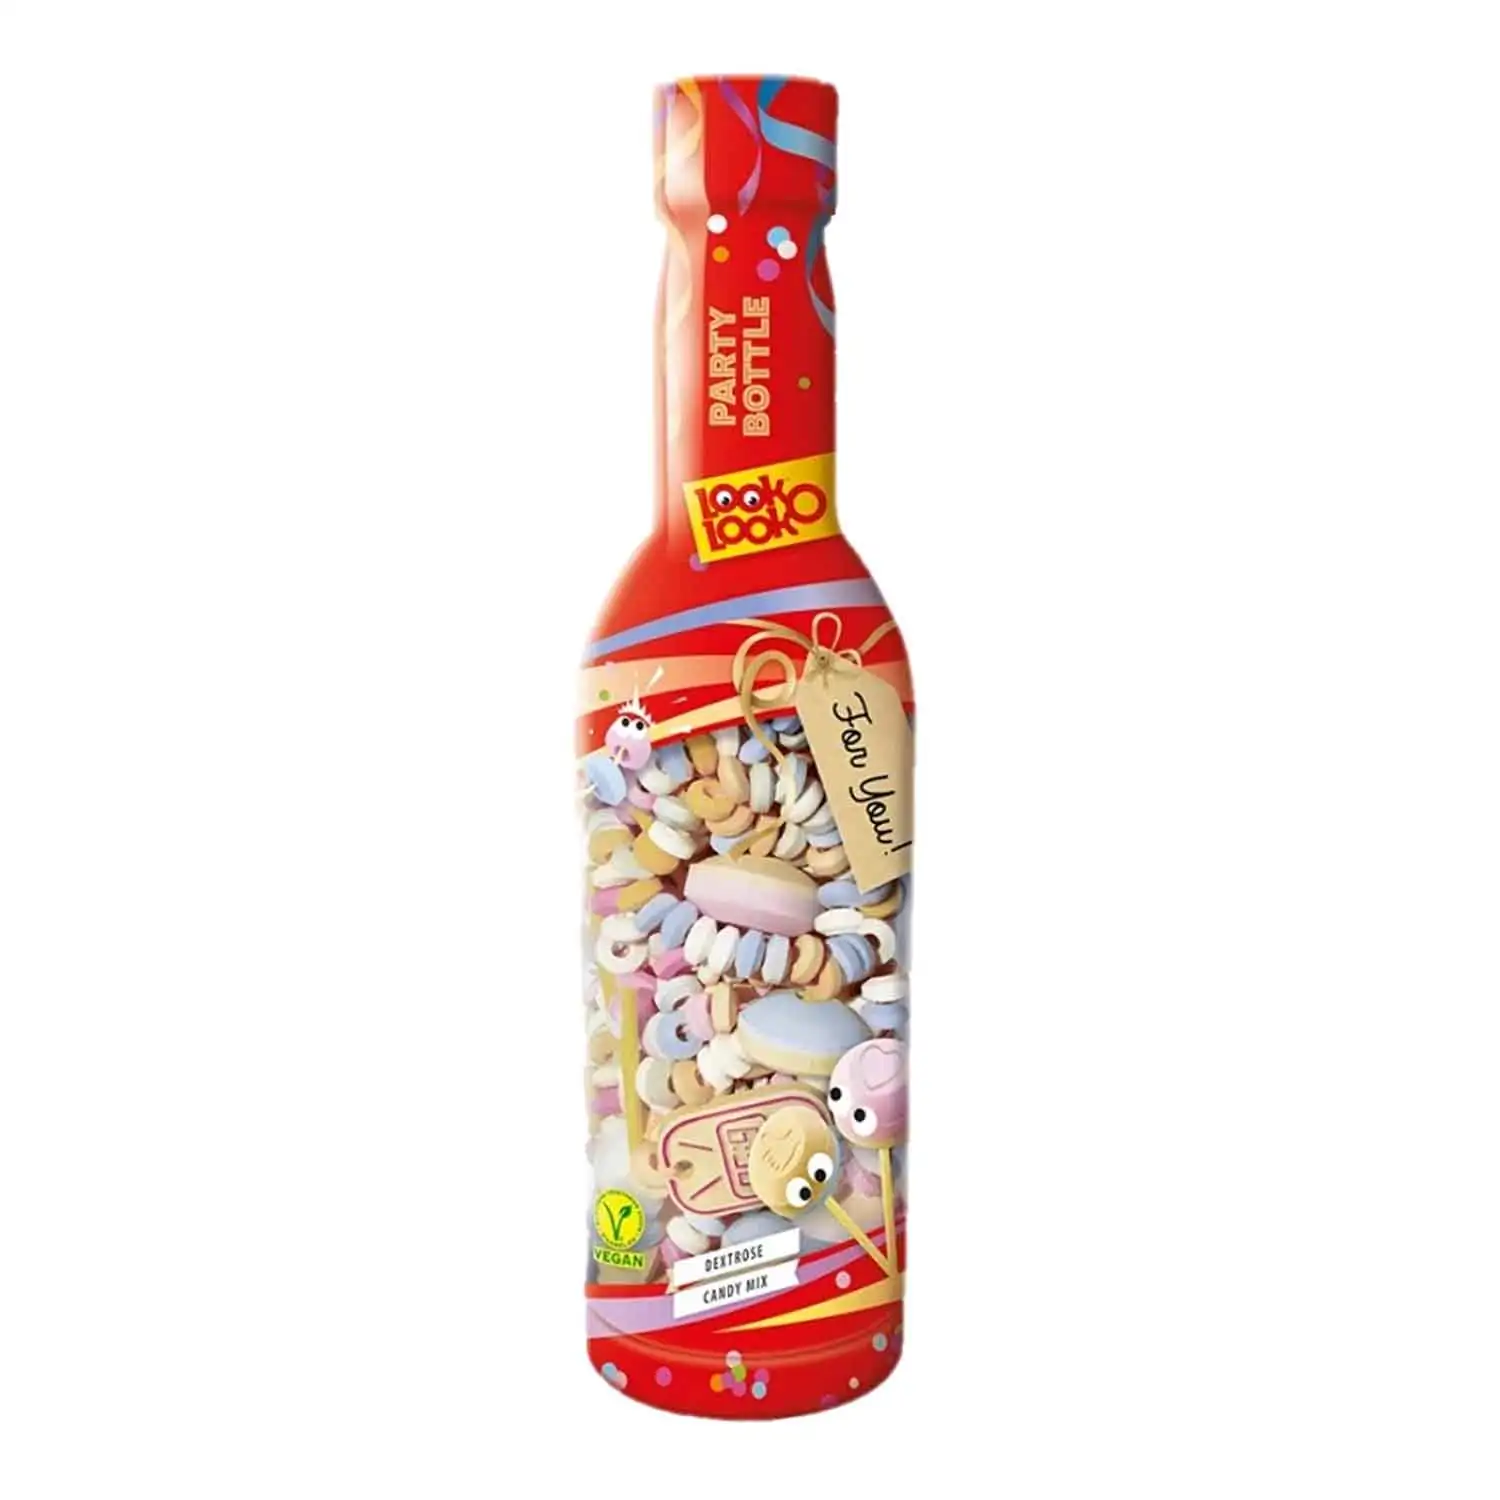 LOL party bottle 325g - Buy at Real Tobacco